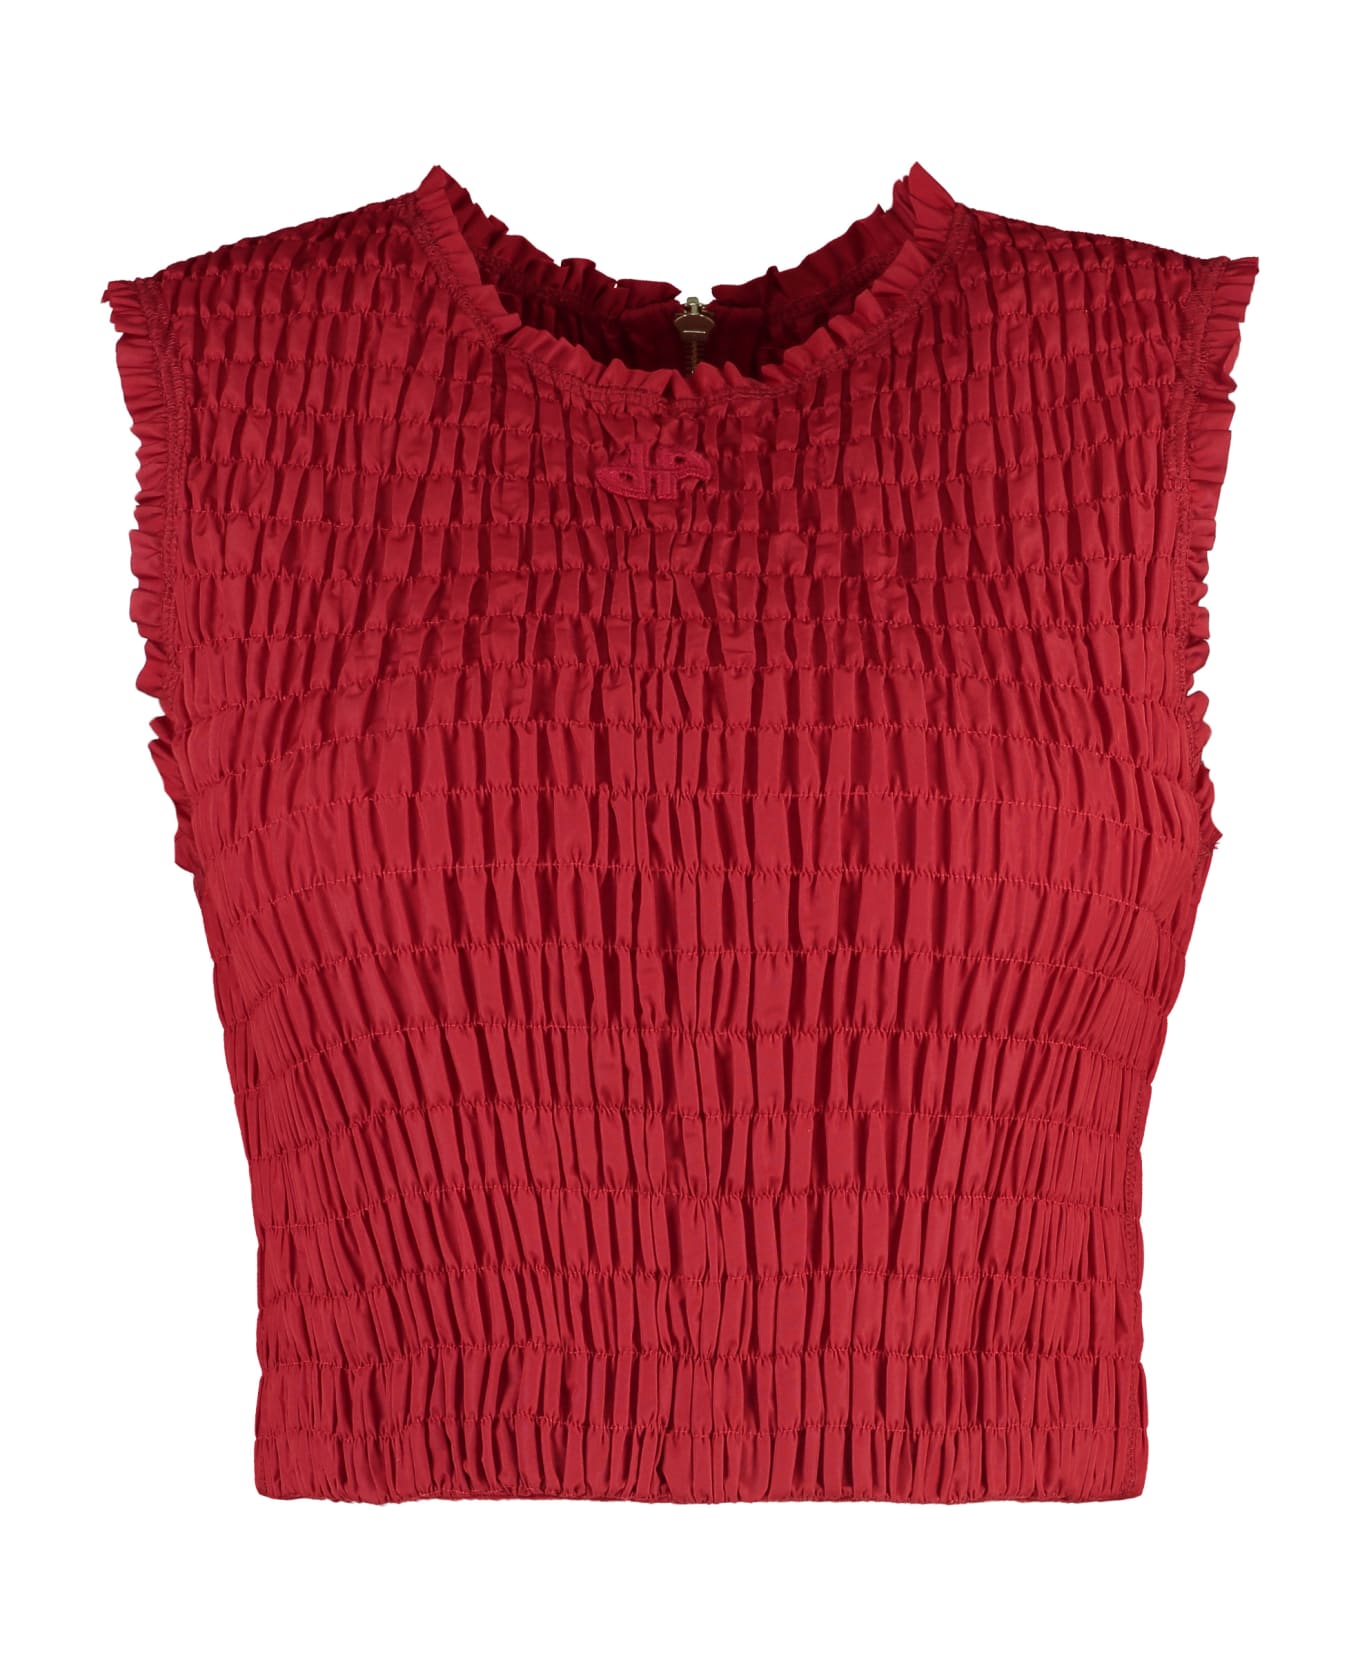 Patou Technical Fabric Crop Top - red